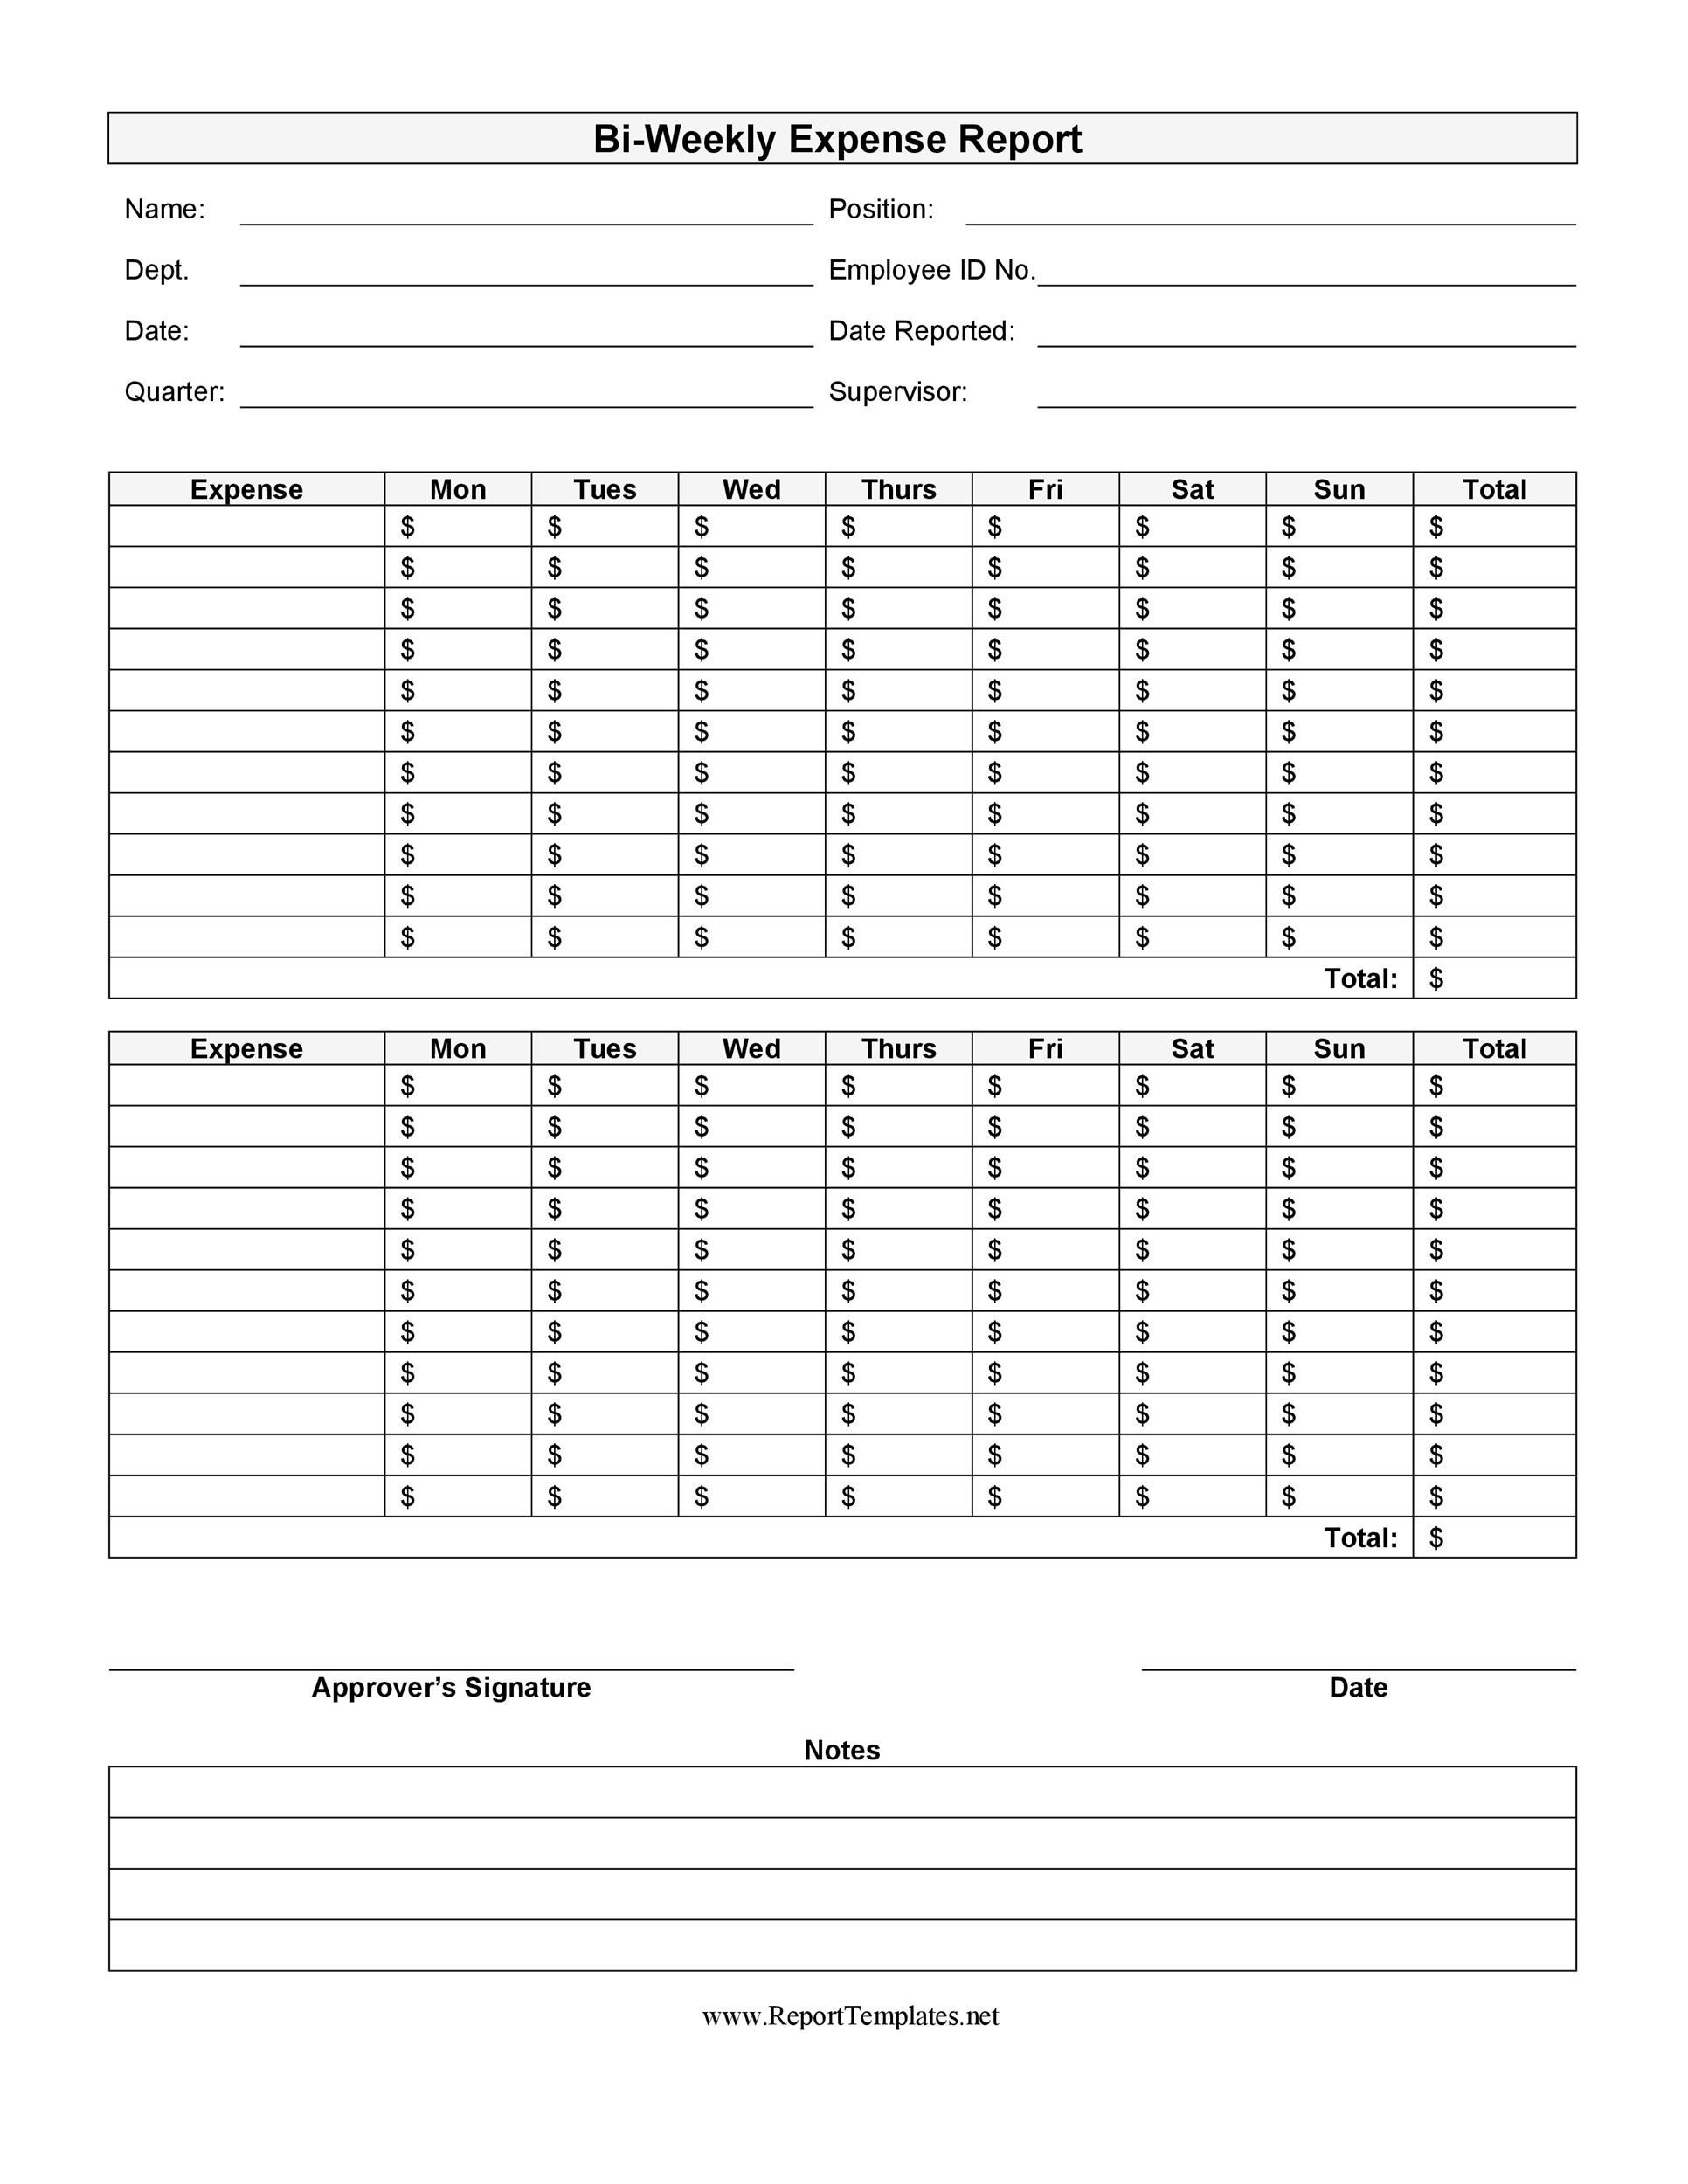 Business Expense Report Template Free from templatelab.com